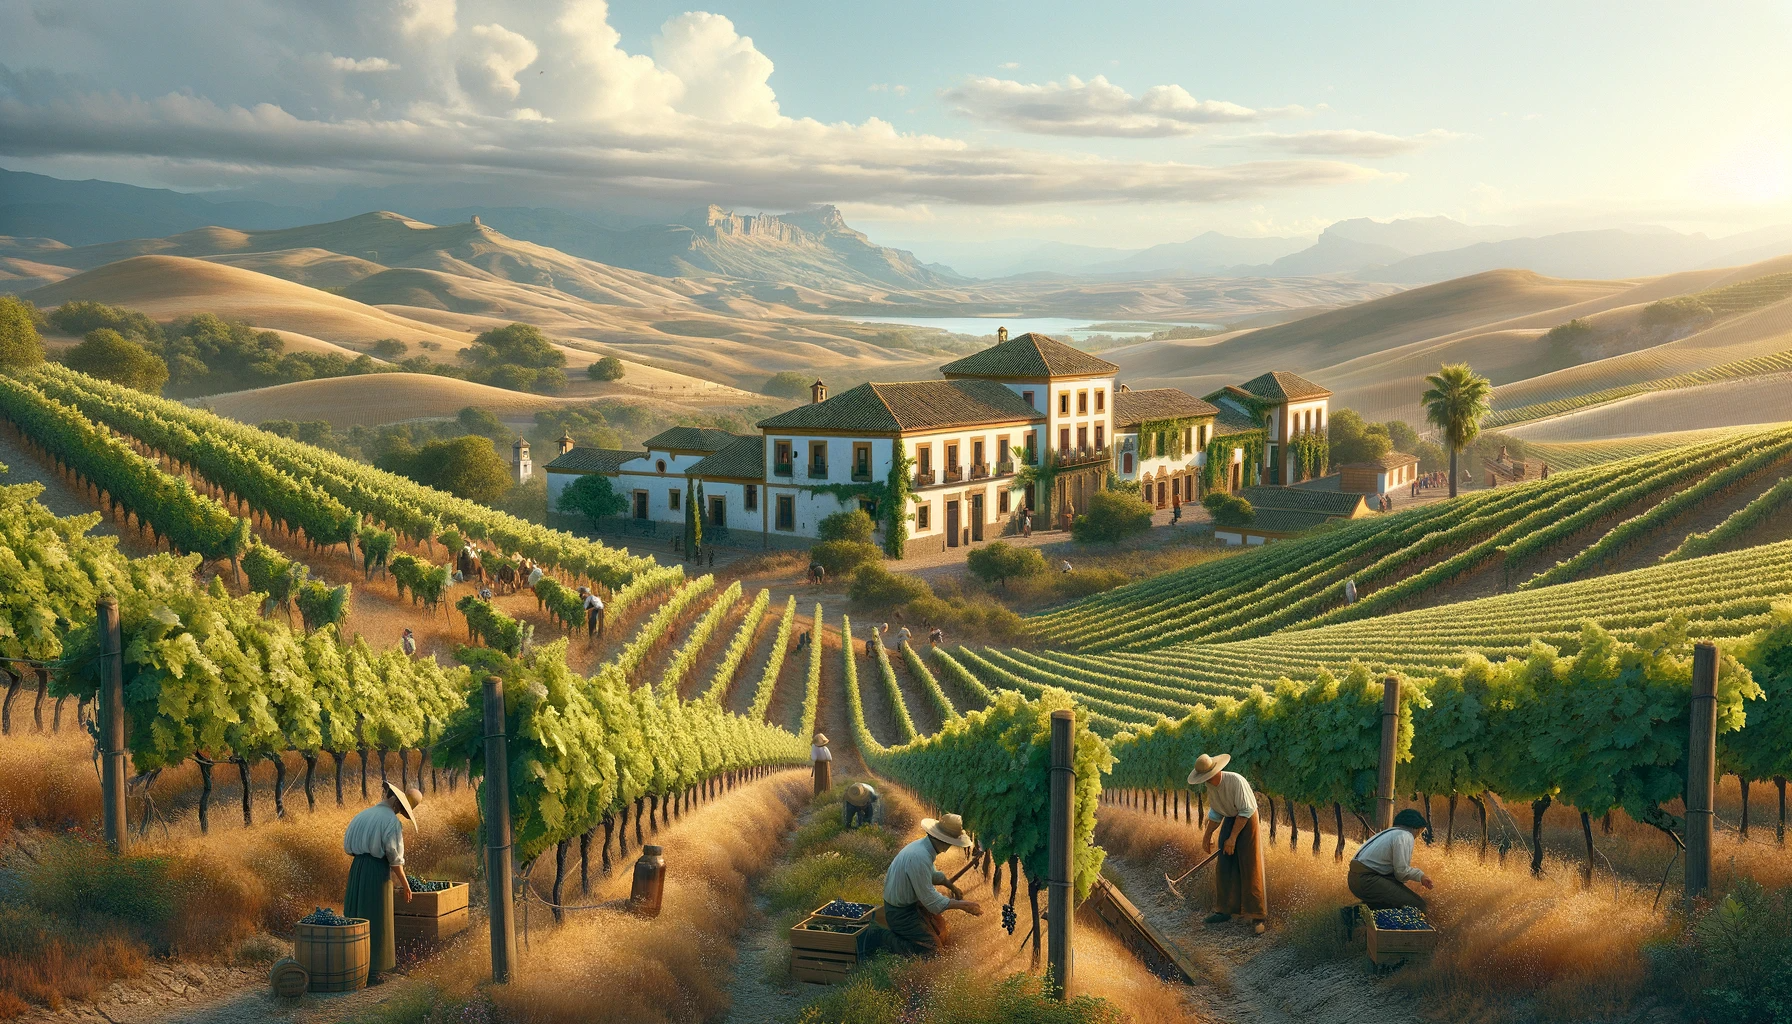 A-realistic-depiction-of-the-history-and-culture-of-winemaking-in-Spain.-The-image-should-include-picturesque-Spanish-landscapes